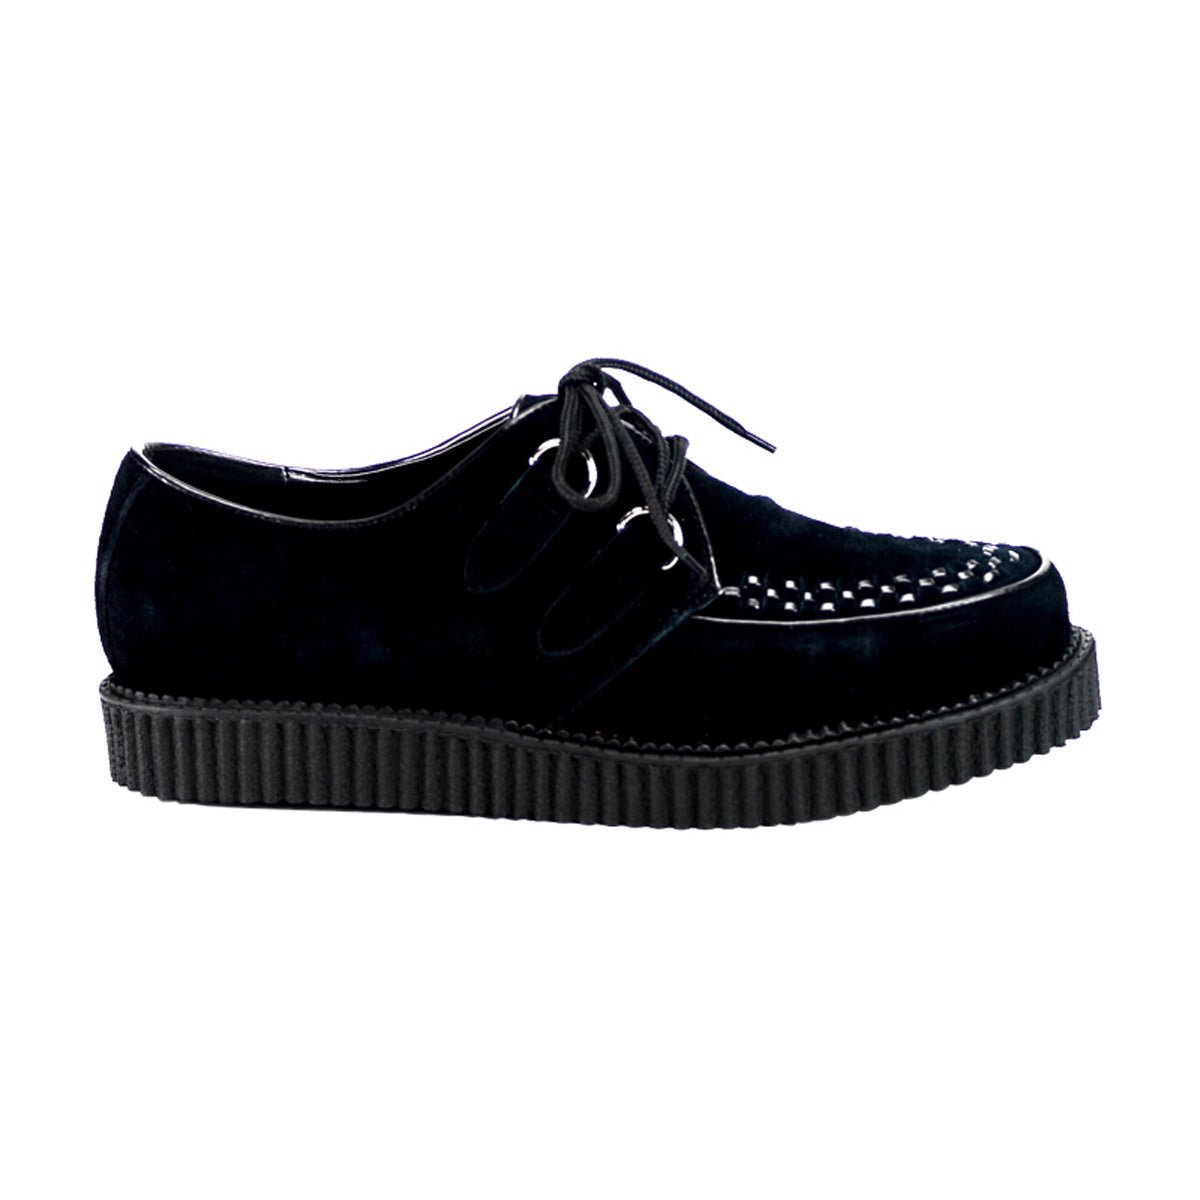 Clearance DemoniaCult Creeper 602S Black Suede Mens/Unisex Size 6UK/7USA